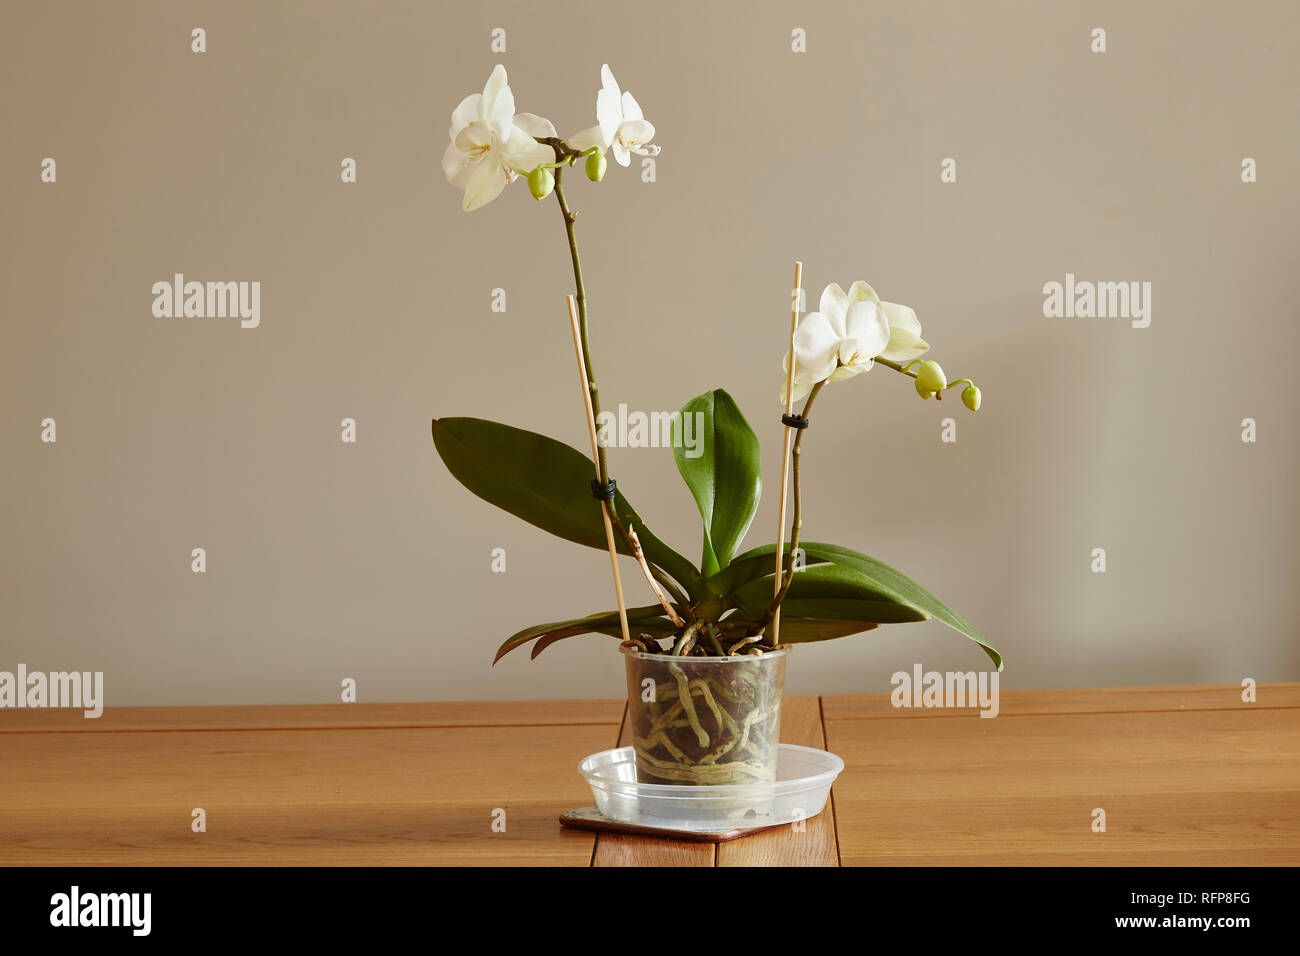 A white Palaenopsis plant  on a table with a plain abackground, Stock Photo